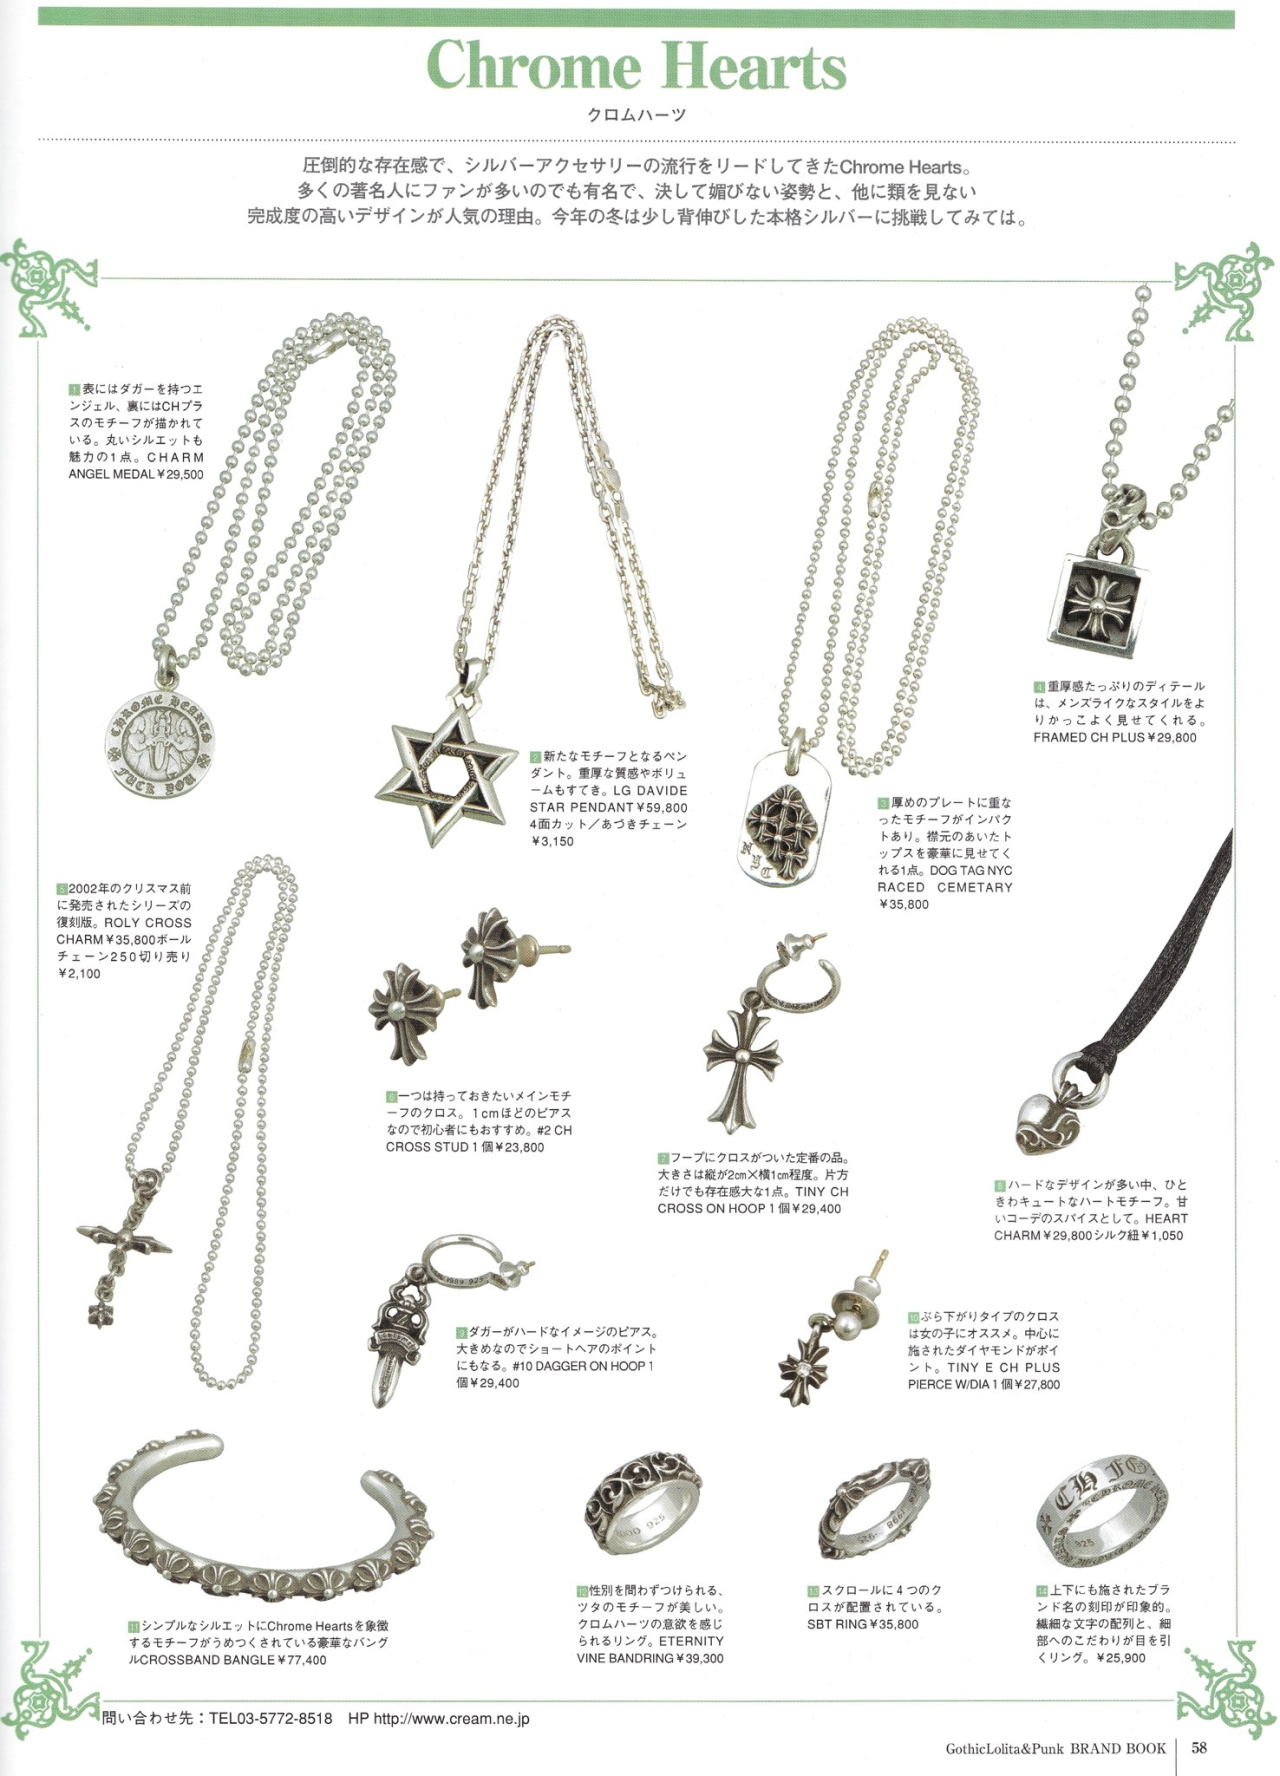 image therapy — Japanese Chrome Hearts Gothic Lolita Jewelry